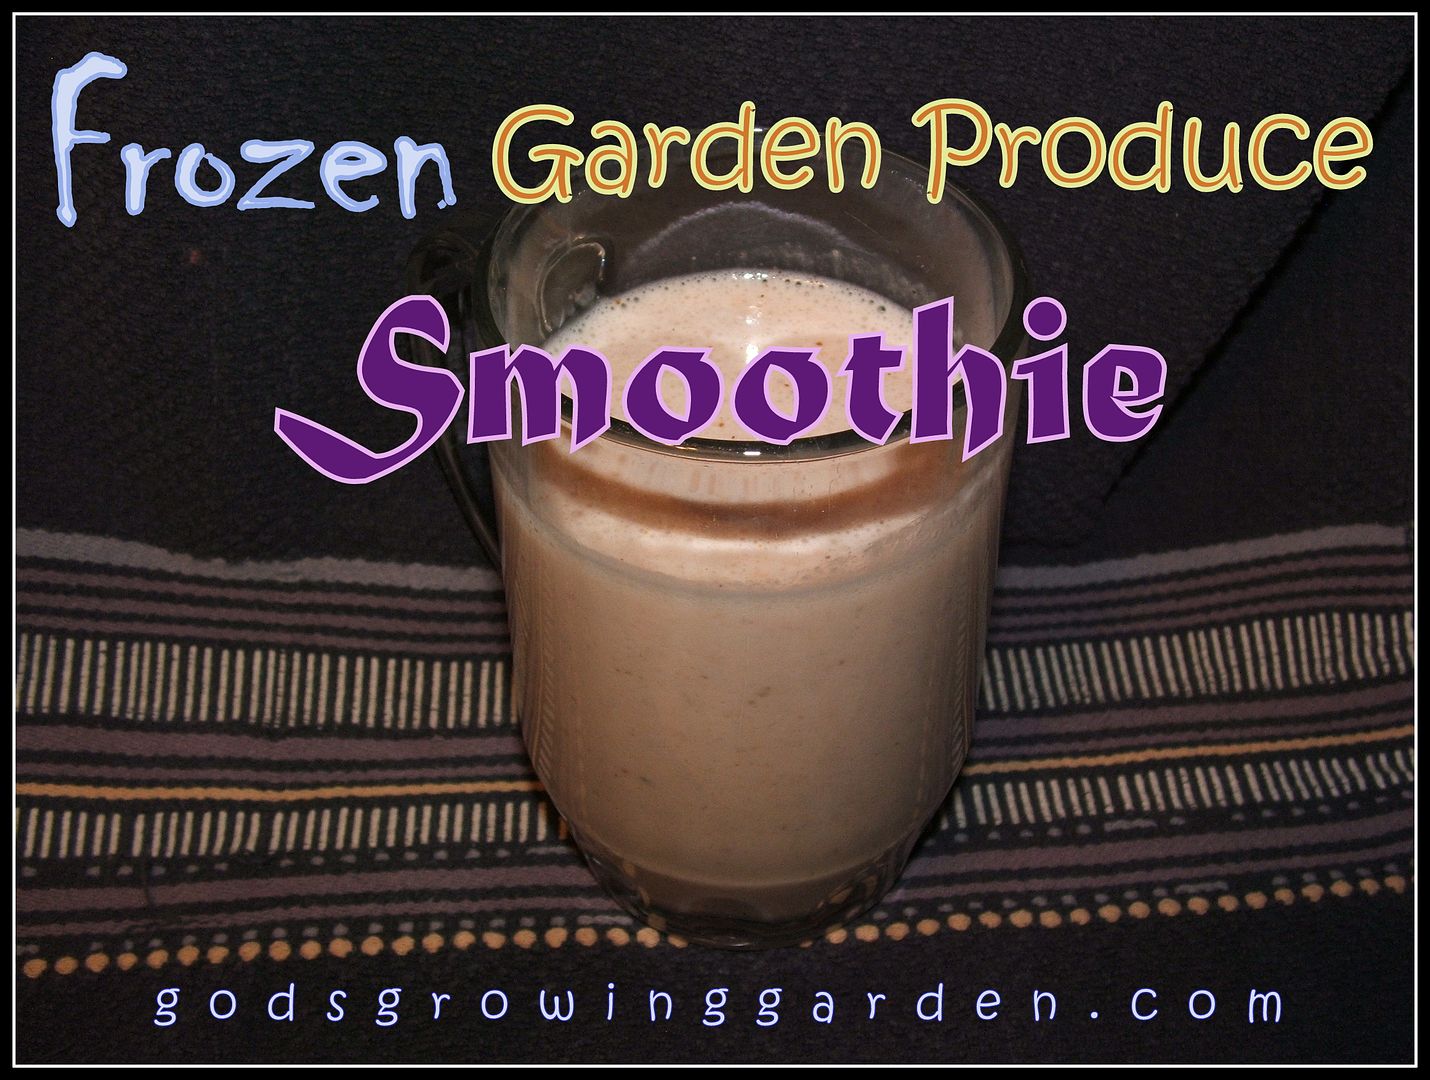 Frozen Garden Produce Smoothie by Angie Ouellette-Tower for godsgrowinggarden.com photo 008_zps99fe6171.jpg